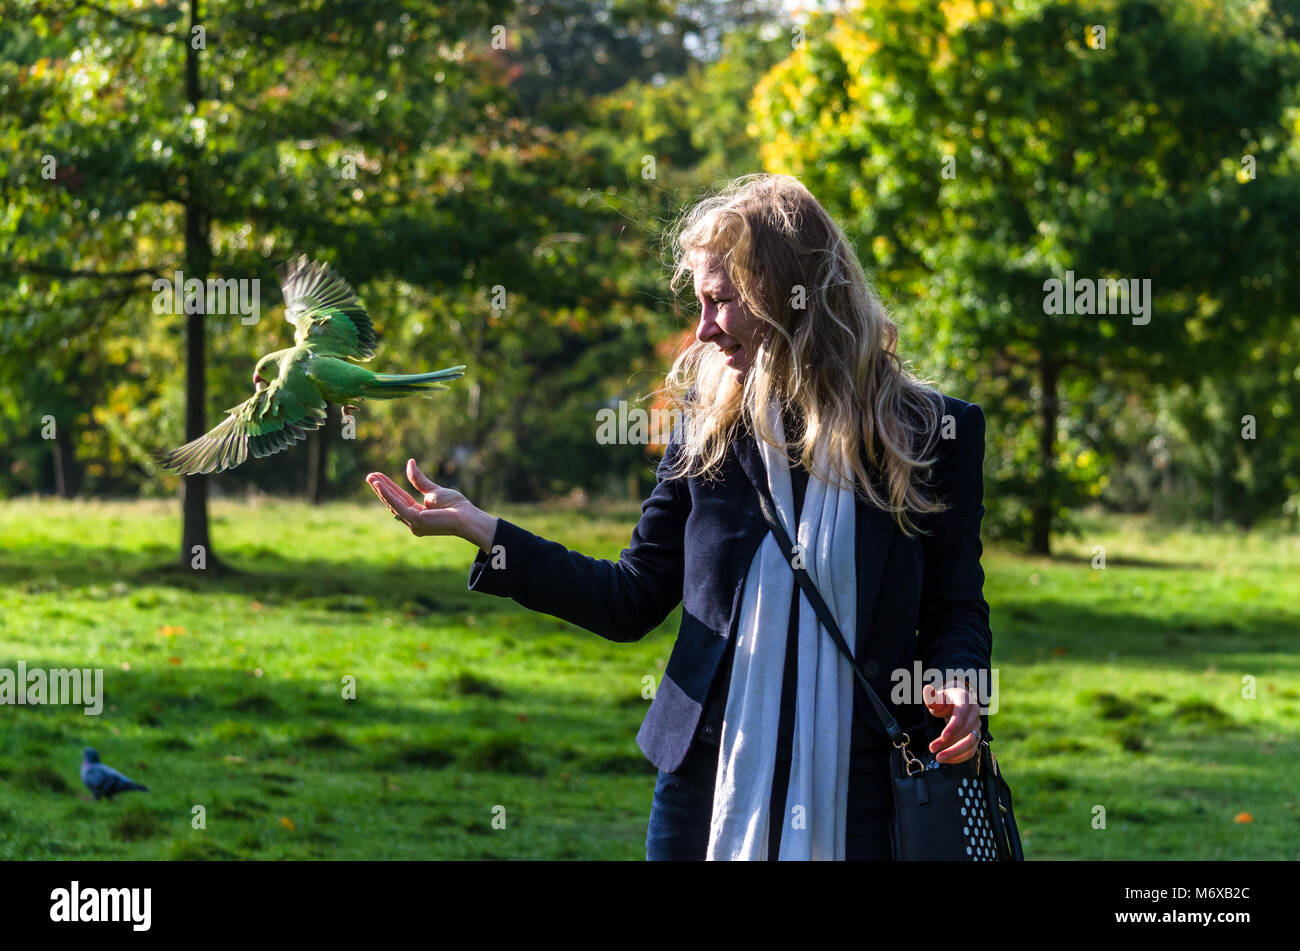 A parakeet flies from the grasp of a young woman in the park Stock Photo